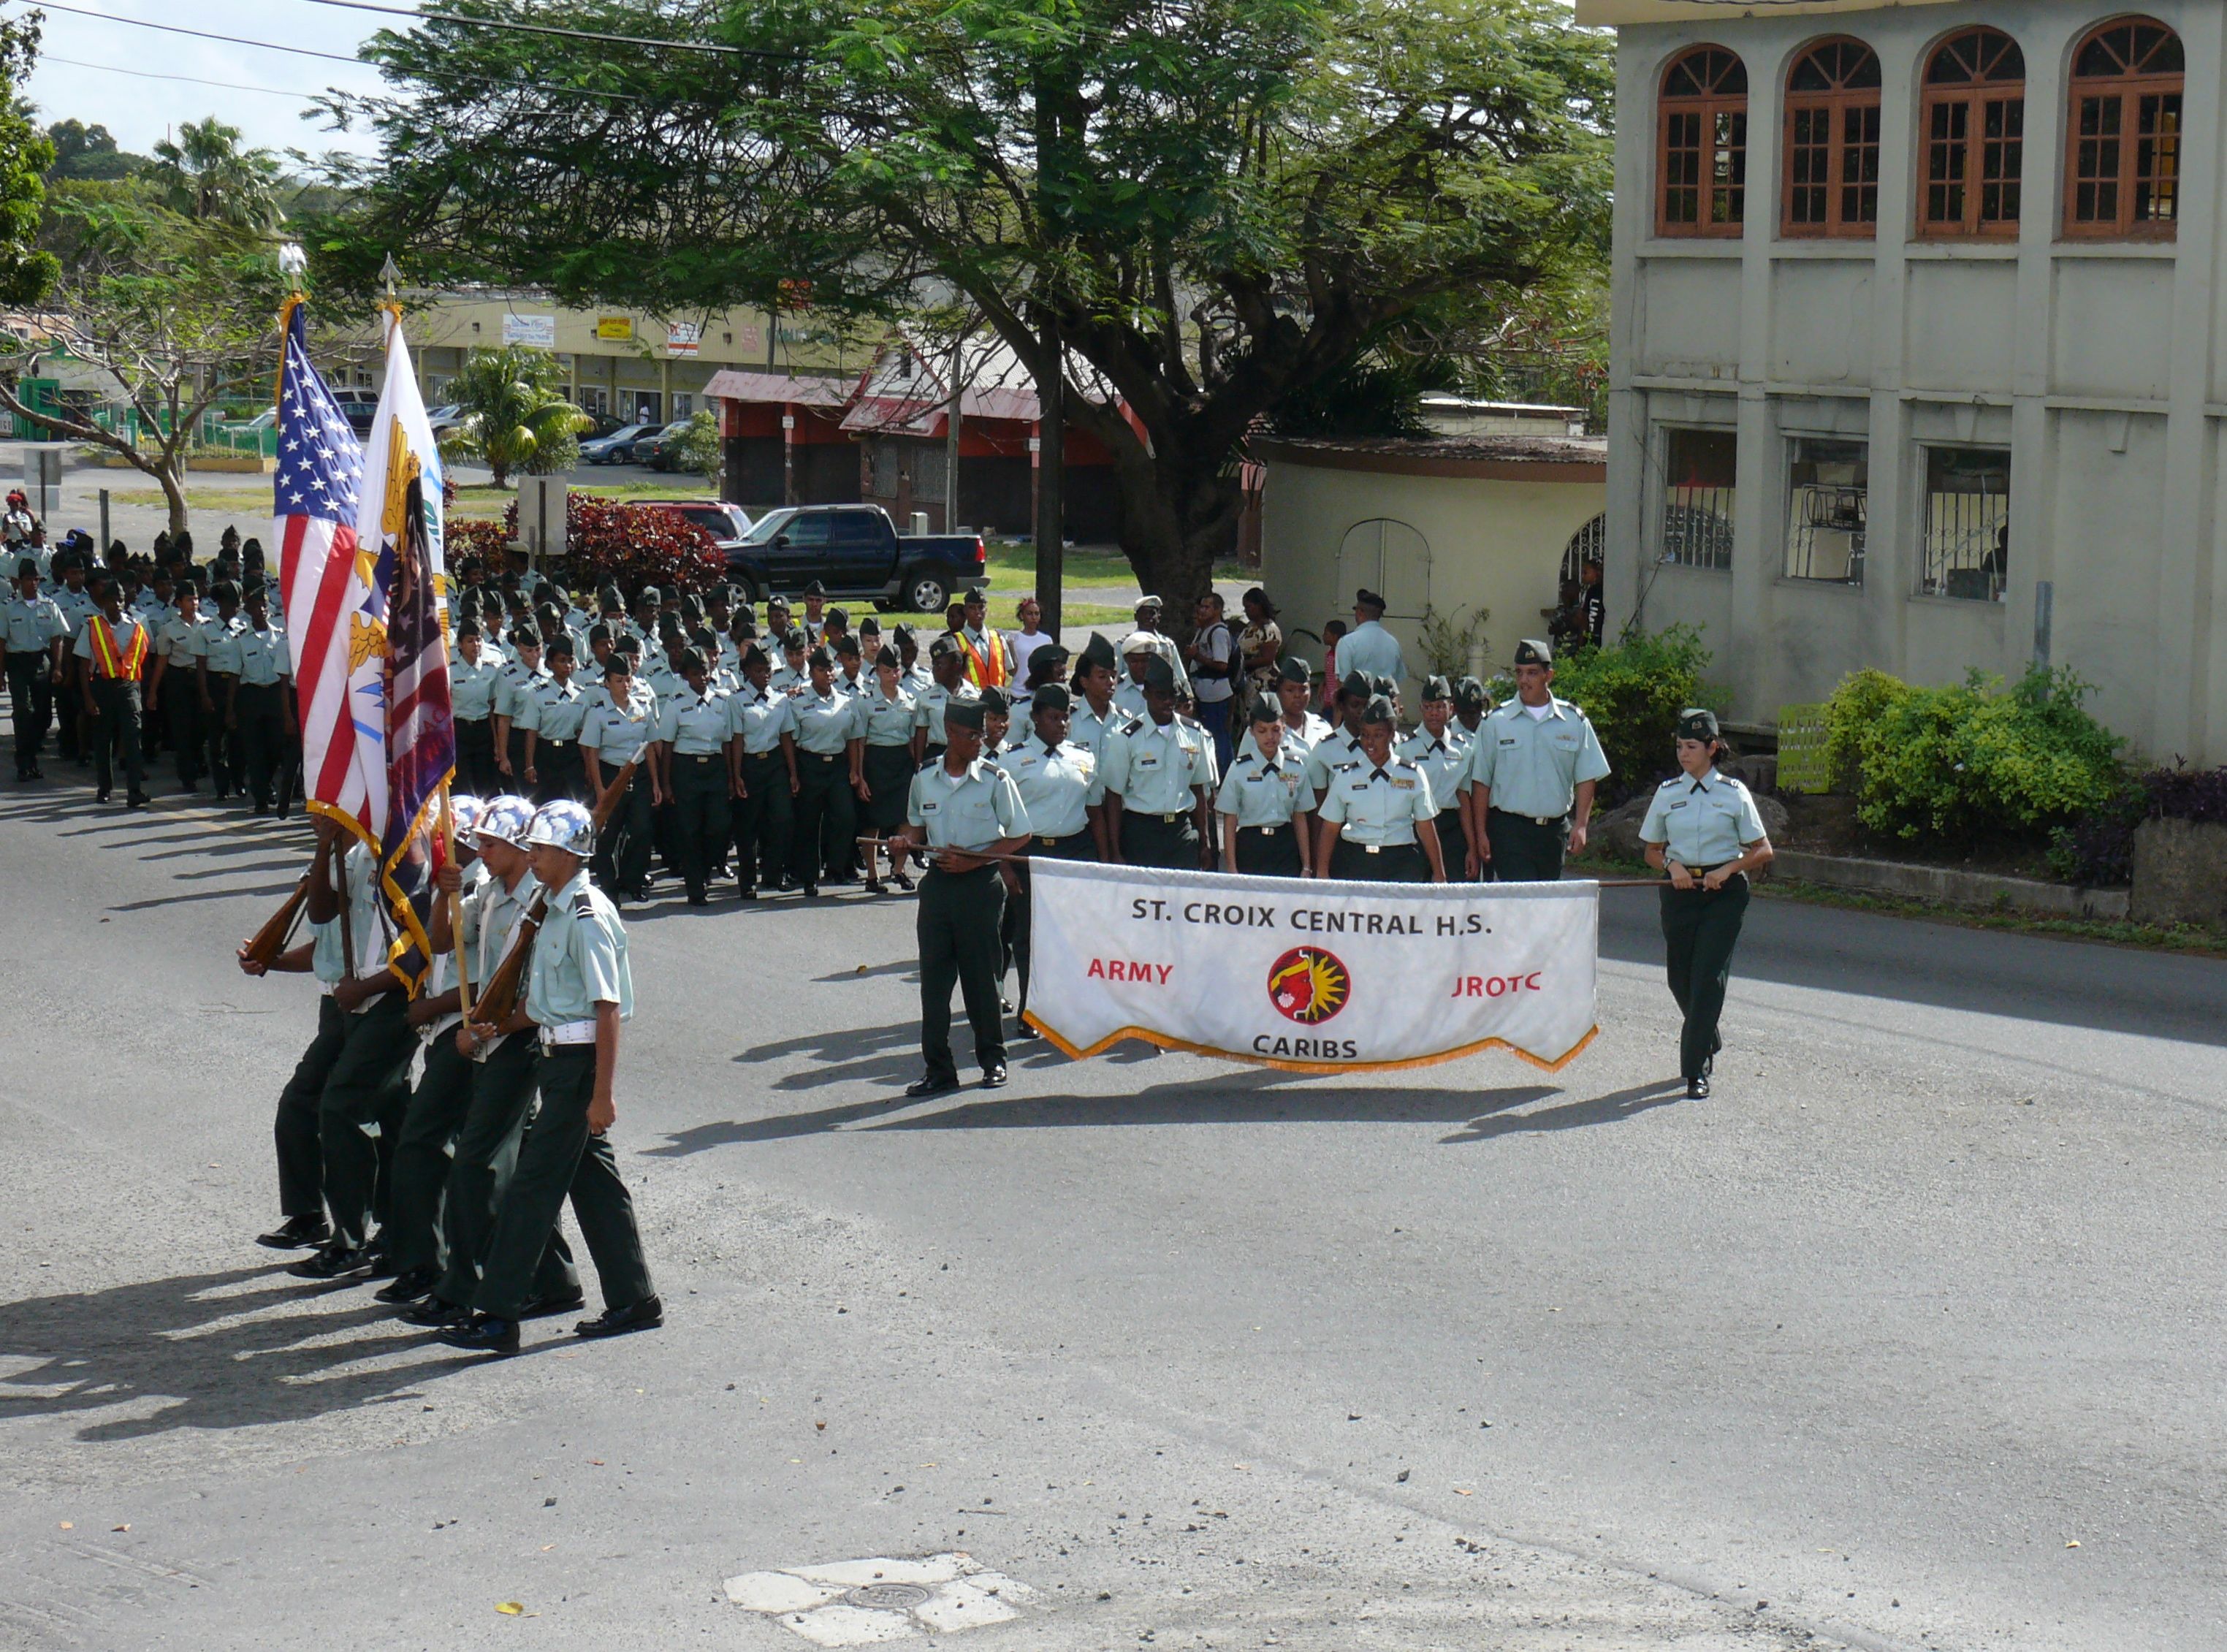 St. Croix Central High Army JROTC in the annual Martin Luther King Jr. Day parade on St. Croix.